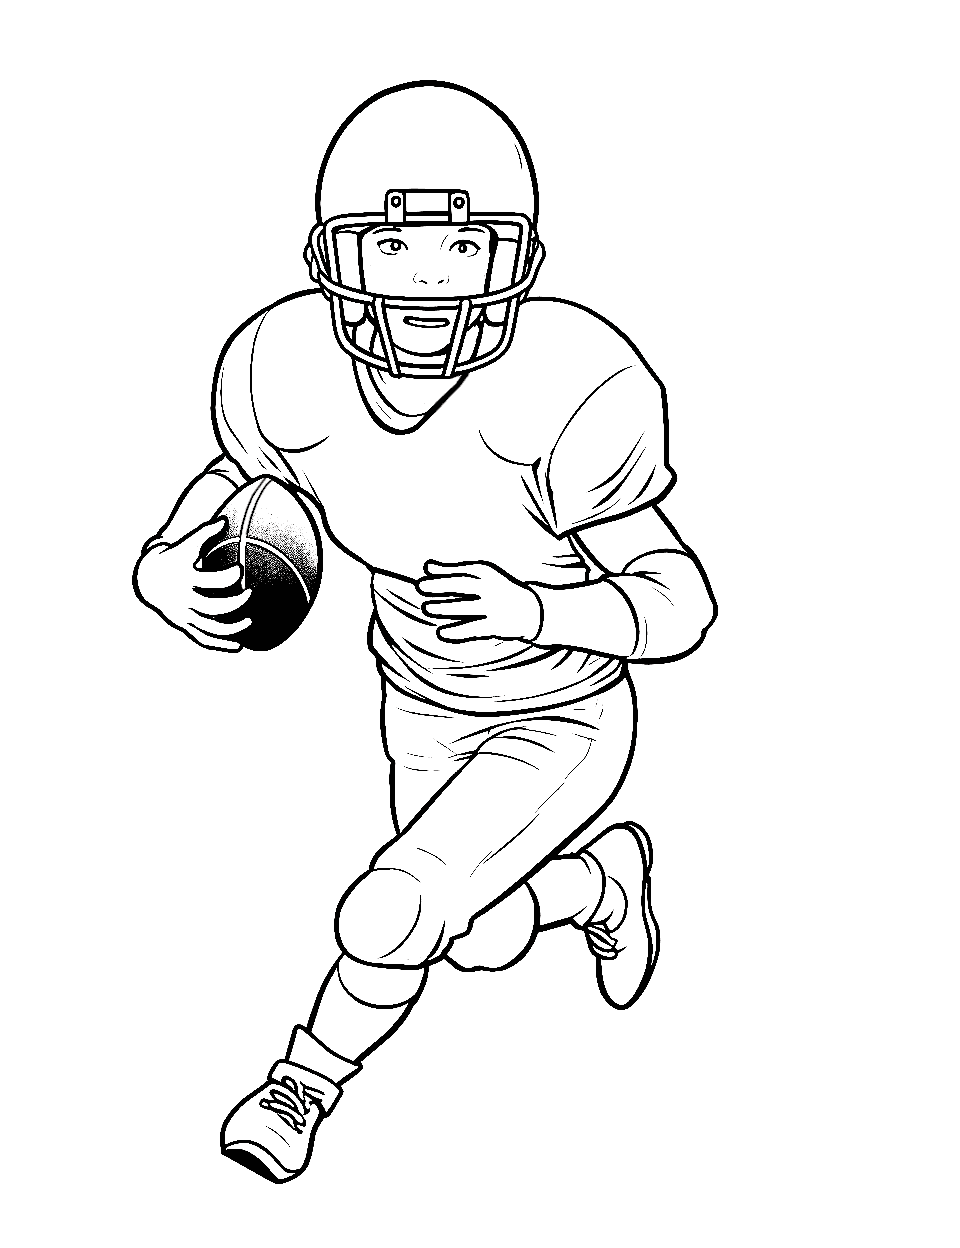 Navigating the Sideline Coloring Page - A player running with the football along the sideline.